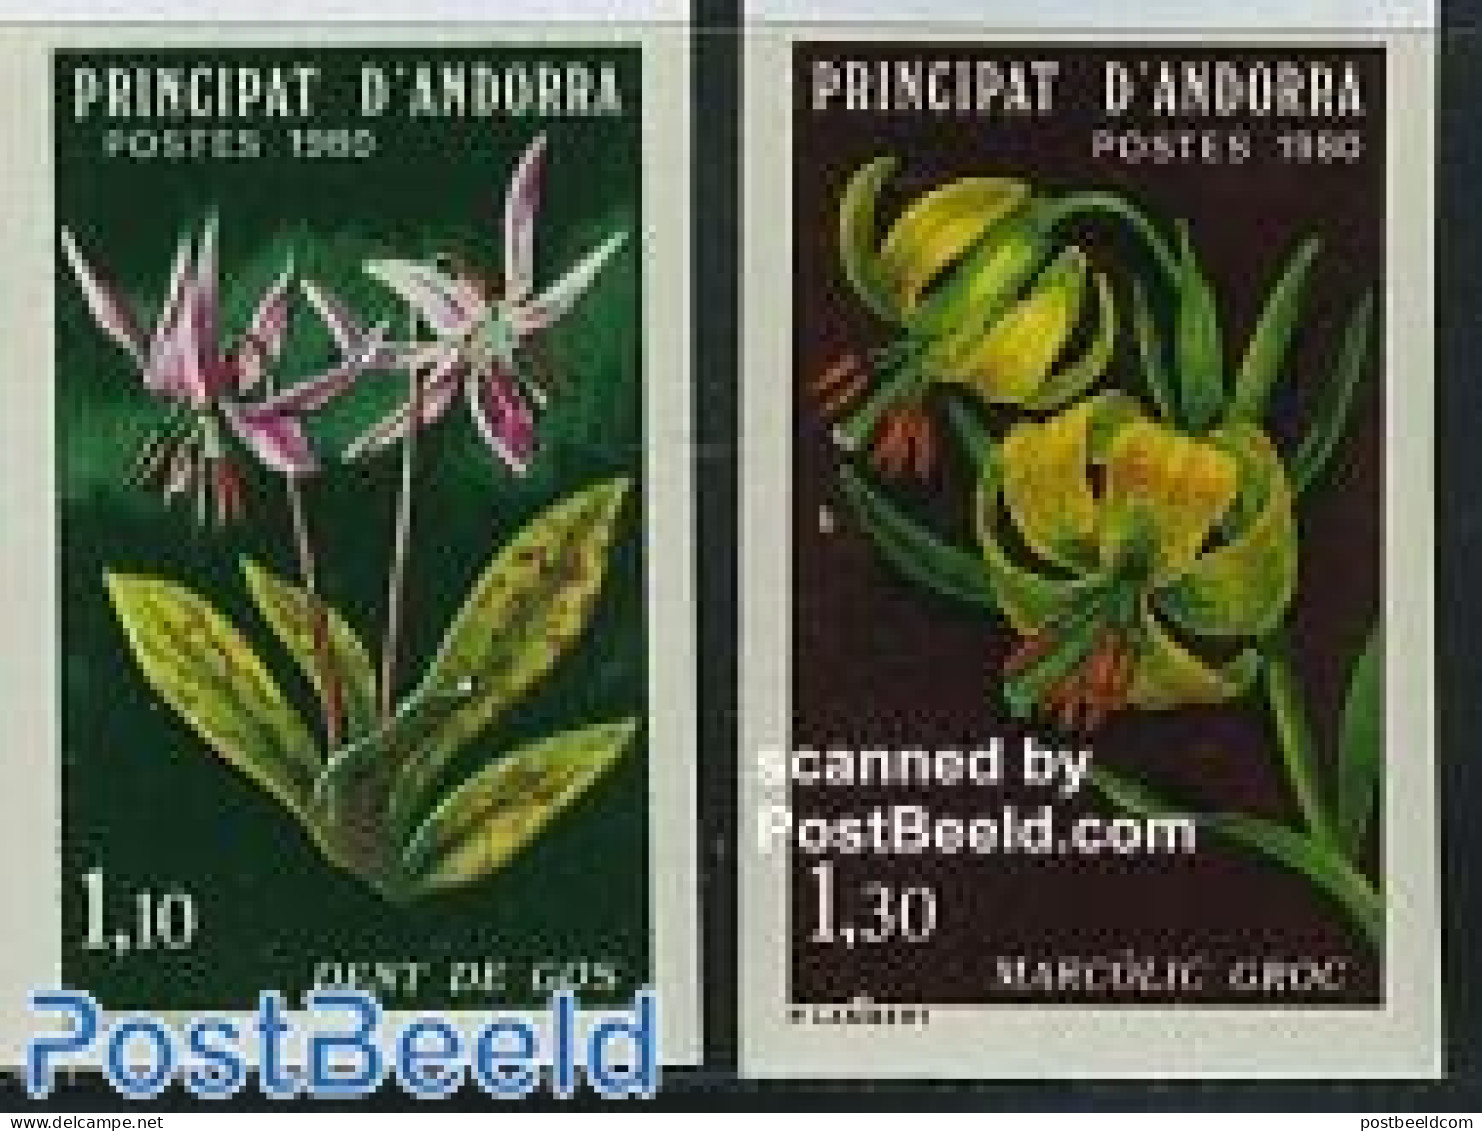 Andorra, French Post 1980 Flowers 2v Imperforated, Mint NH, Nature - Flowers & Plants - Neufs